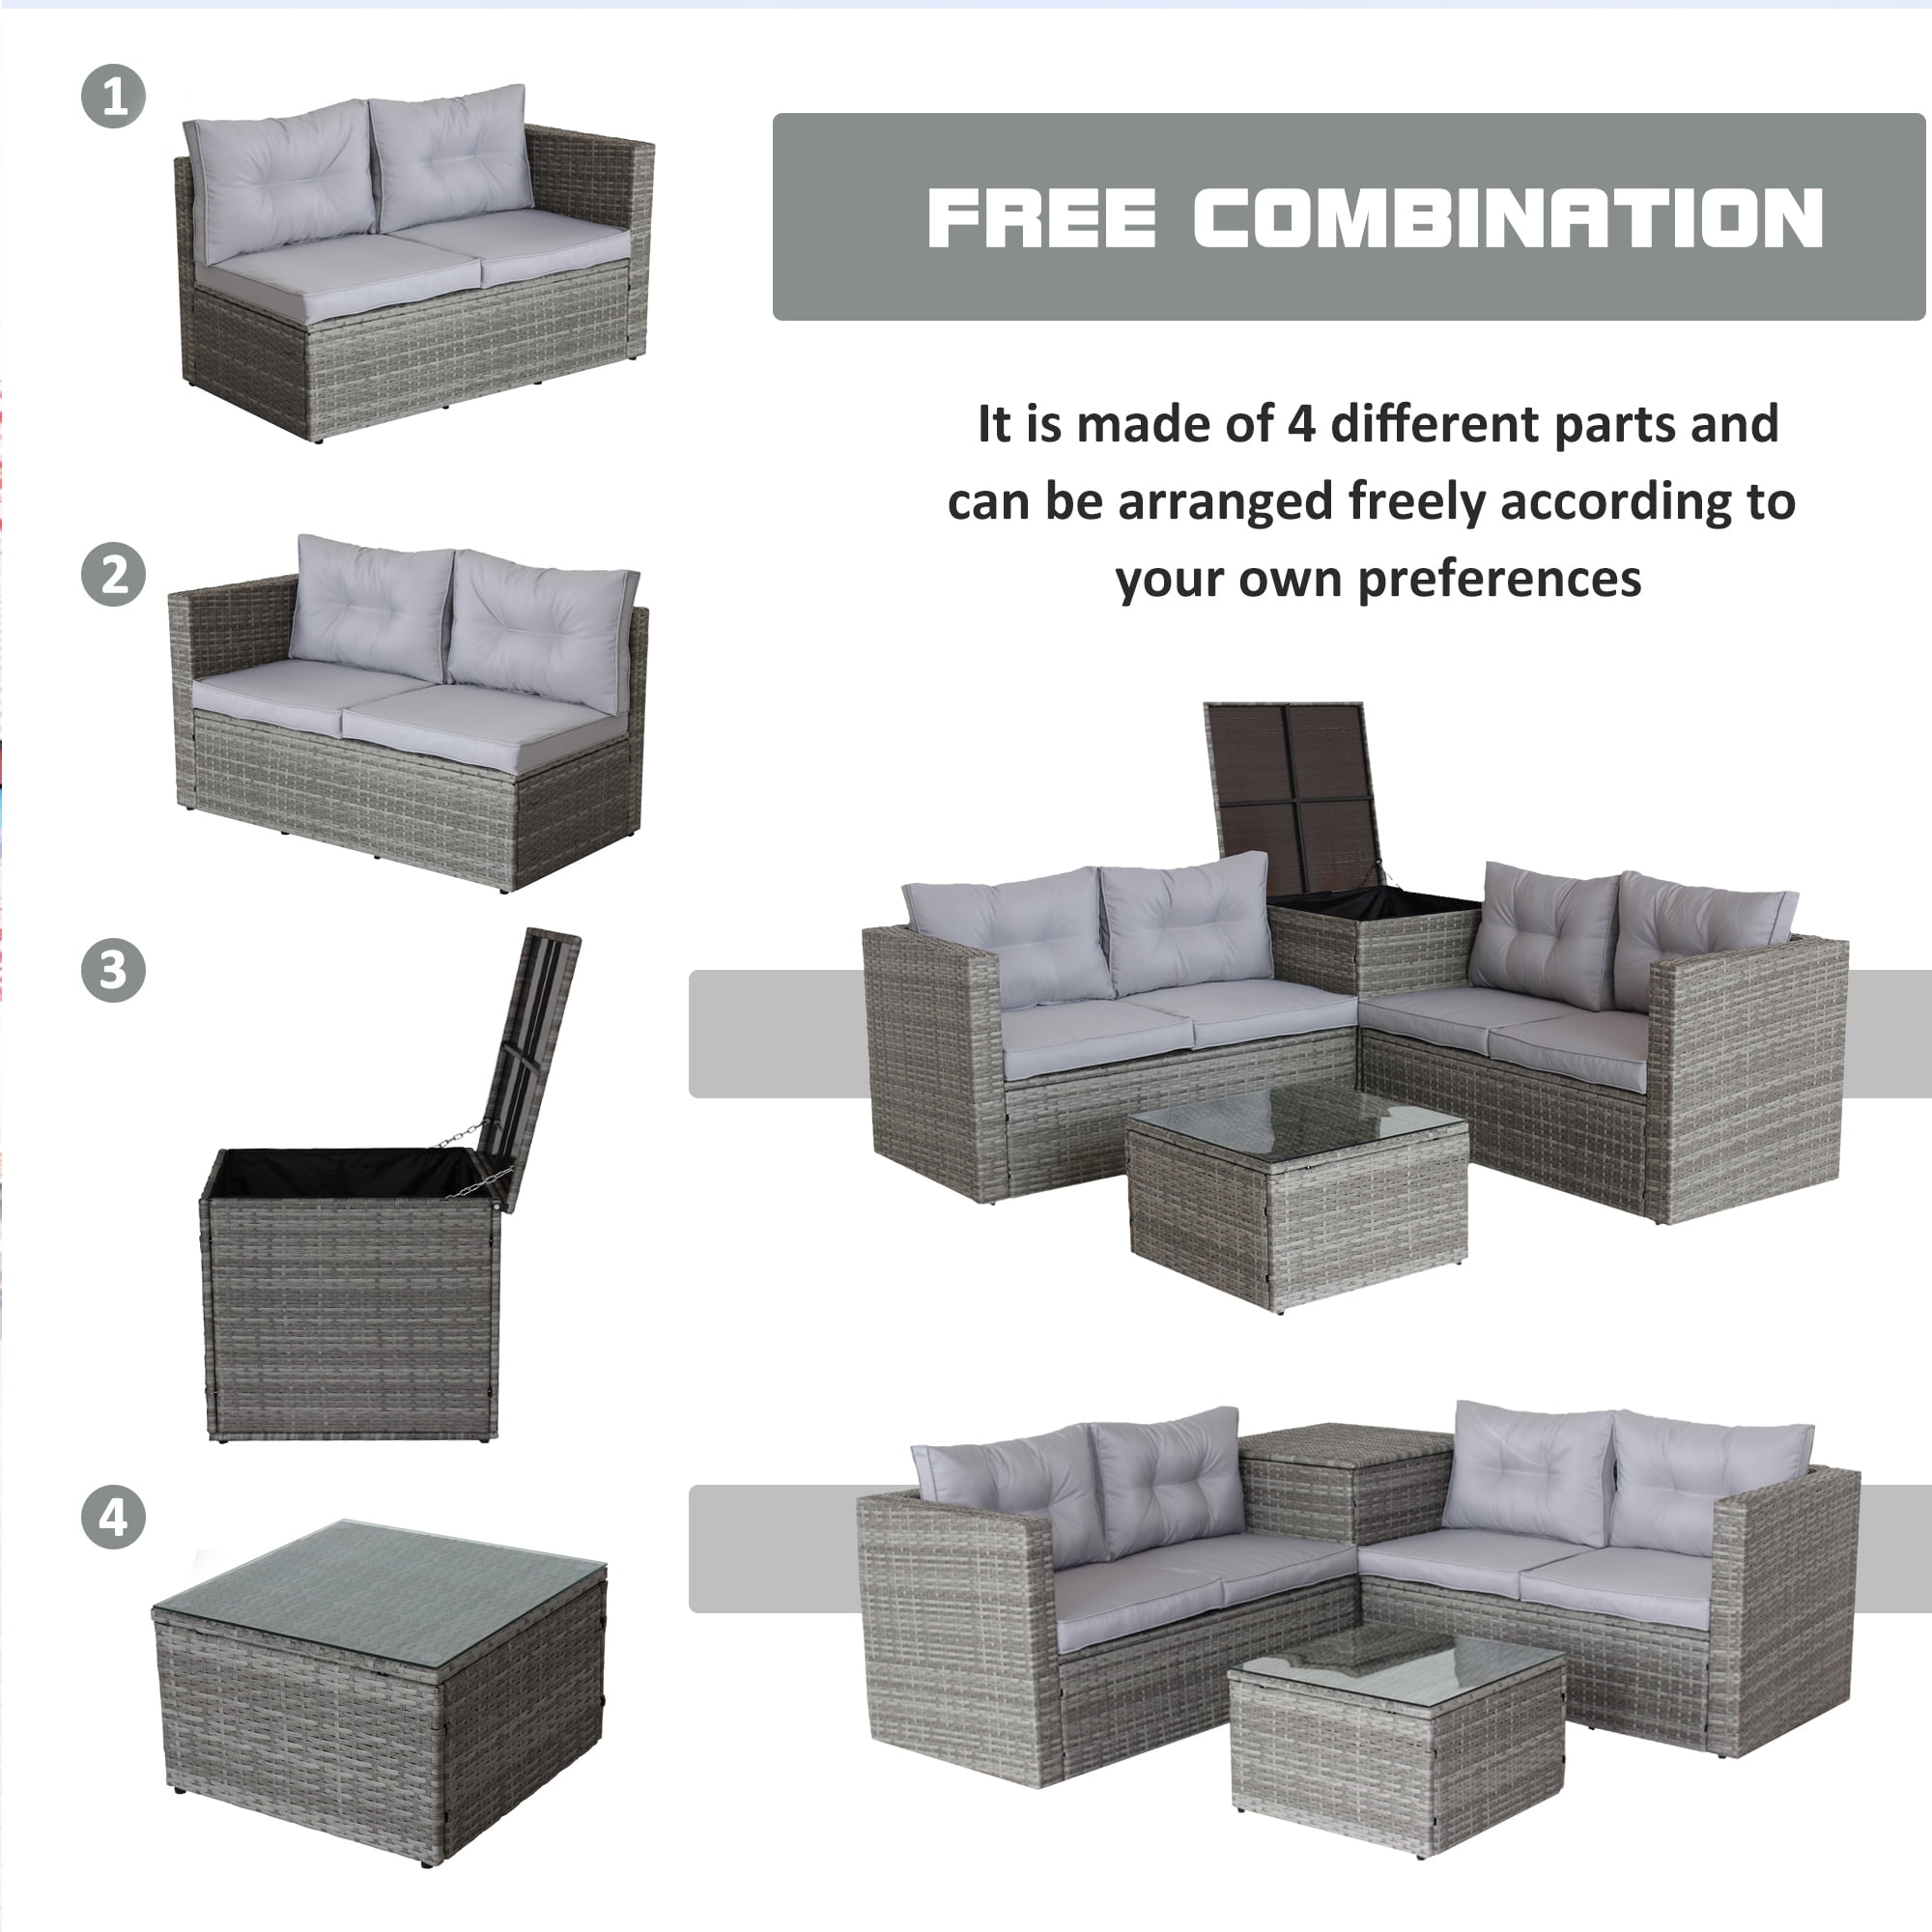 Ellison 4 Piece Sectional Seating Sofa Set with Cushions Highland Dunes Frame Color/Cushion Color: Gray/Gray